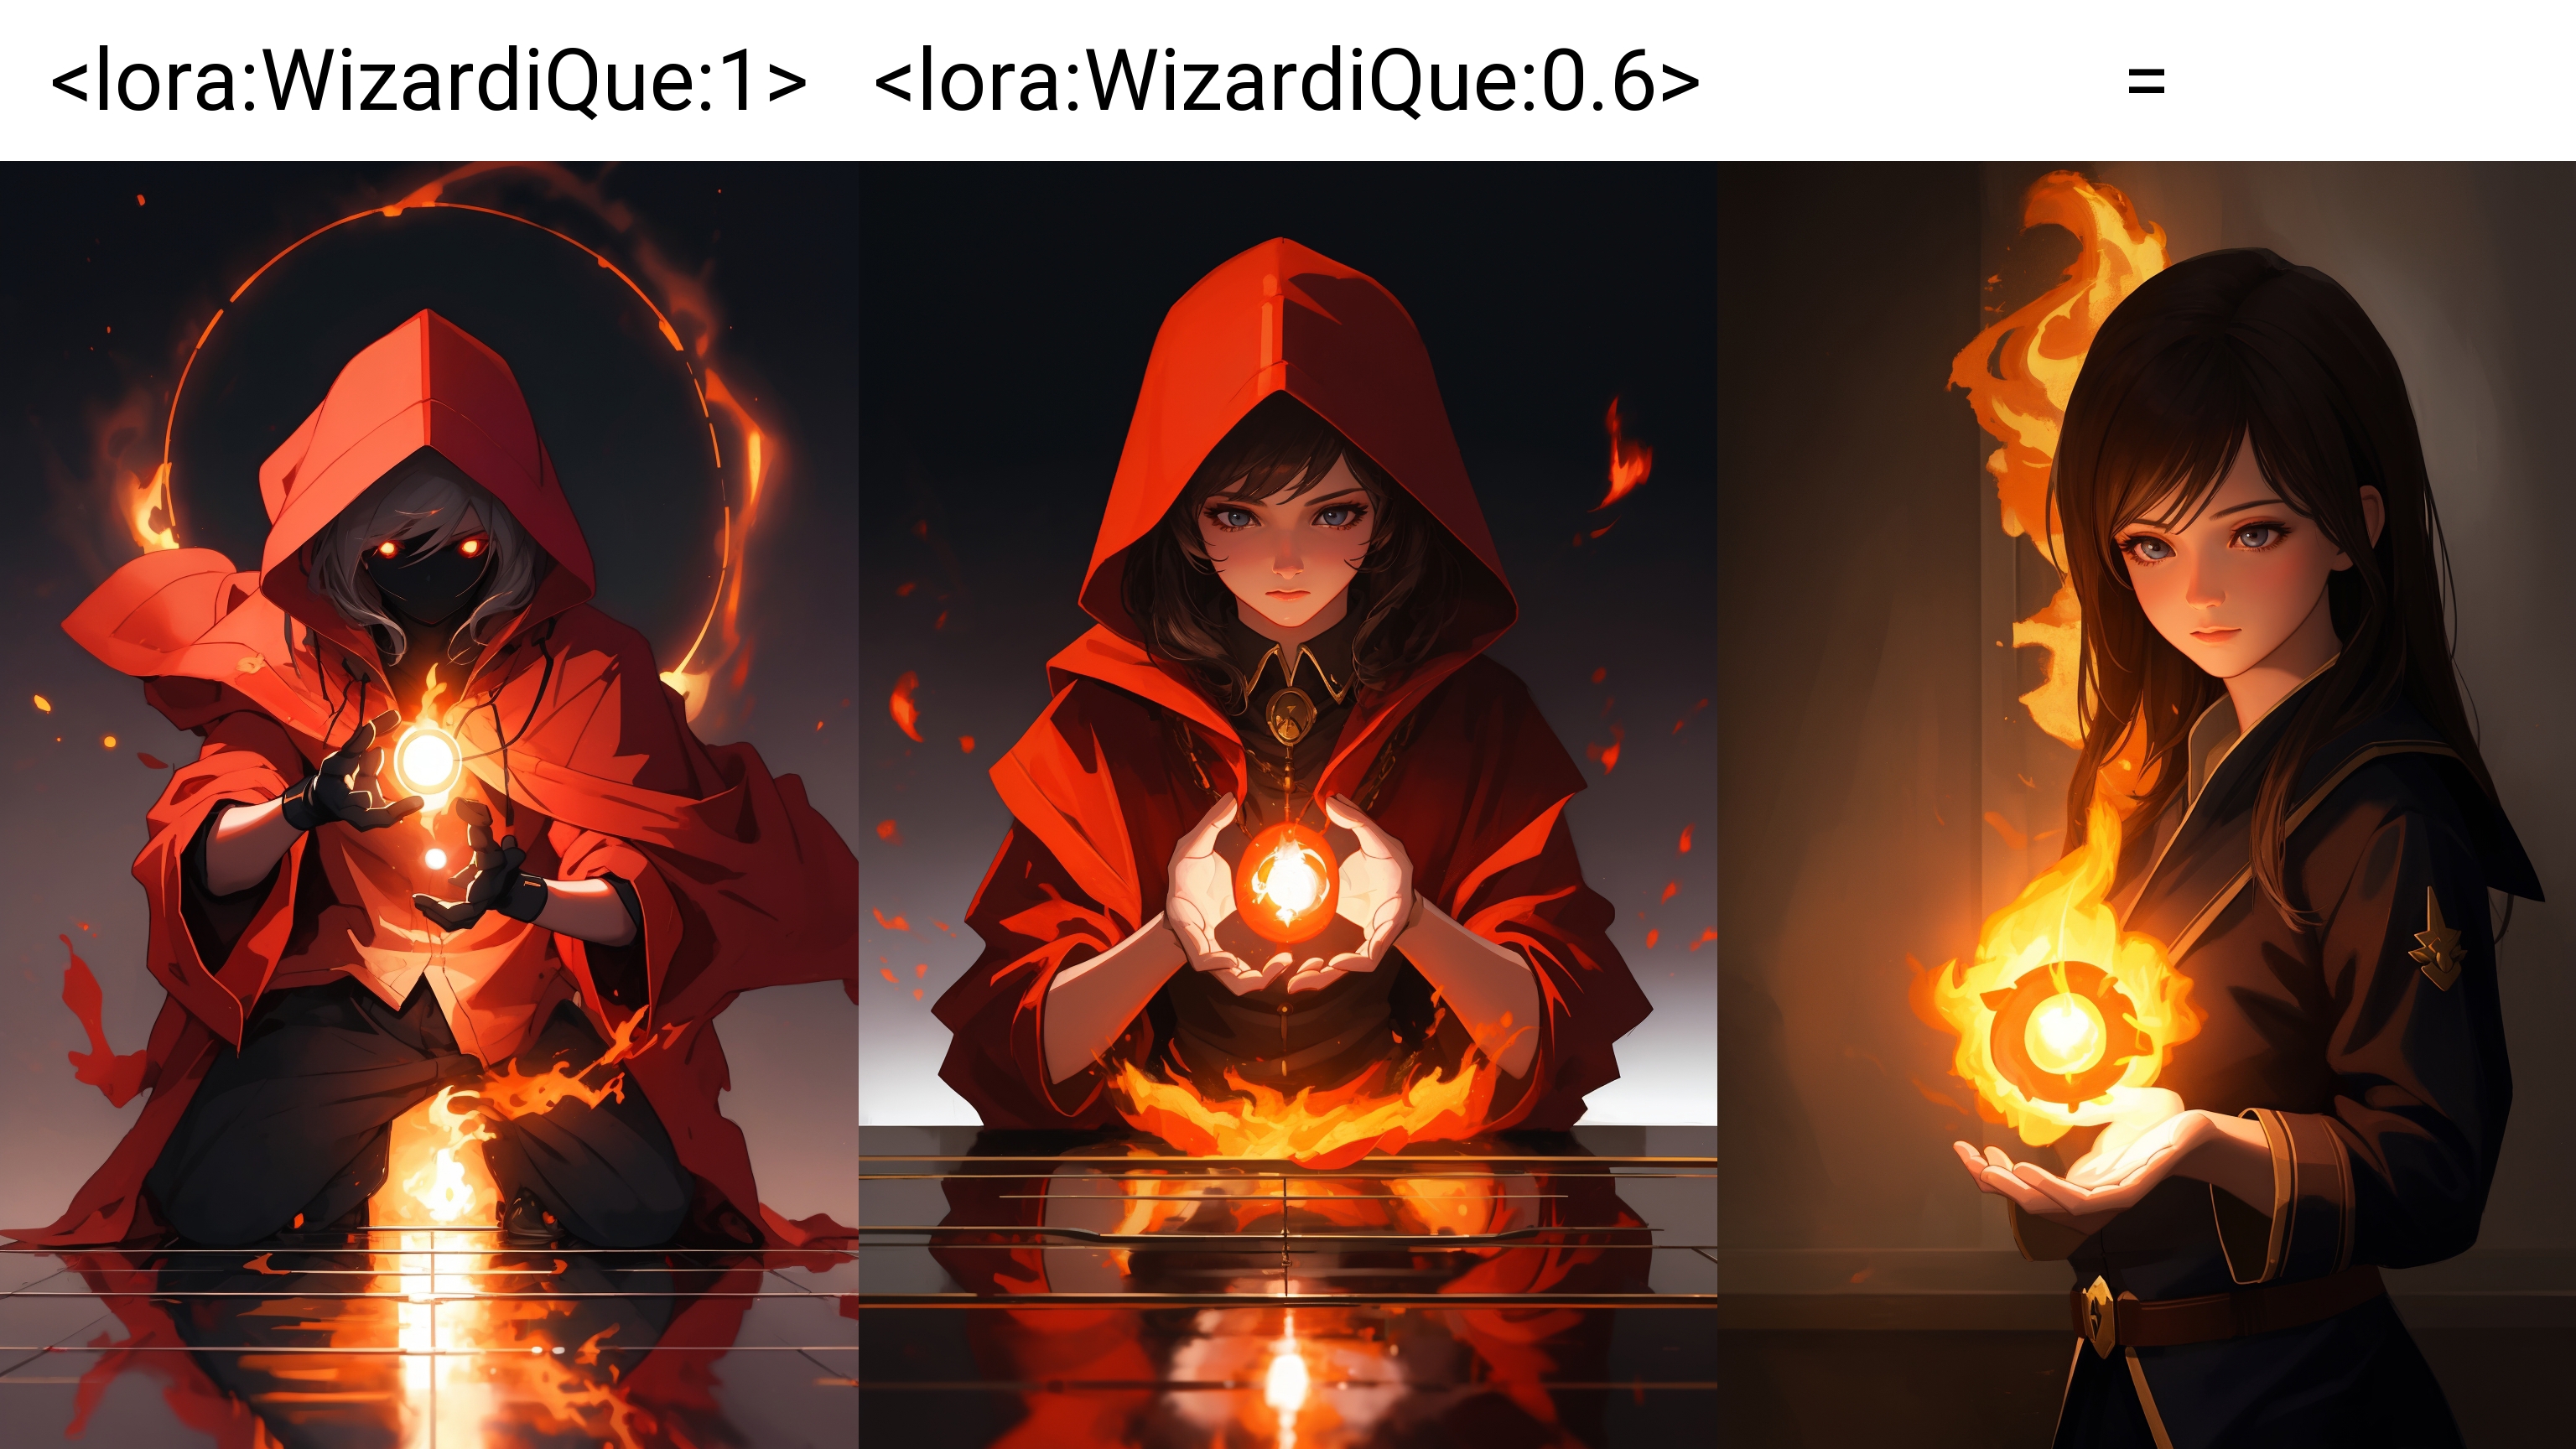 WizardiQue image by ForkY